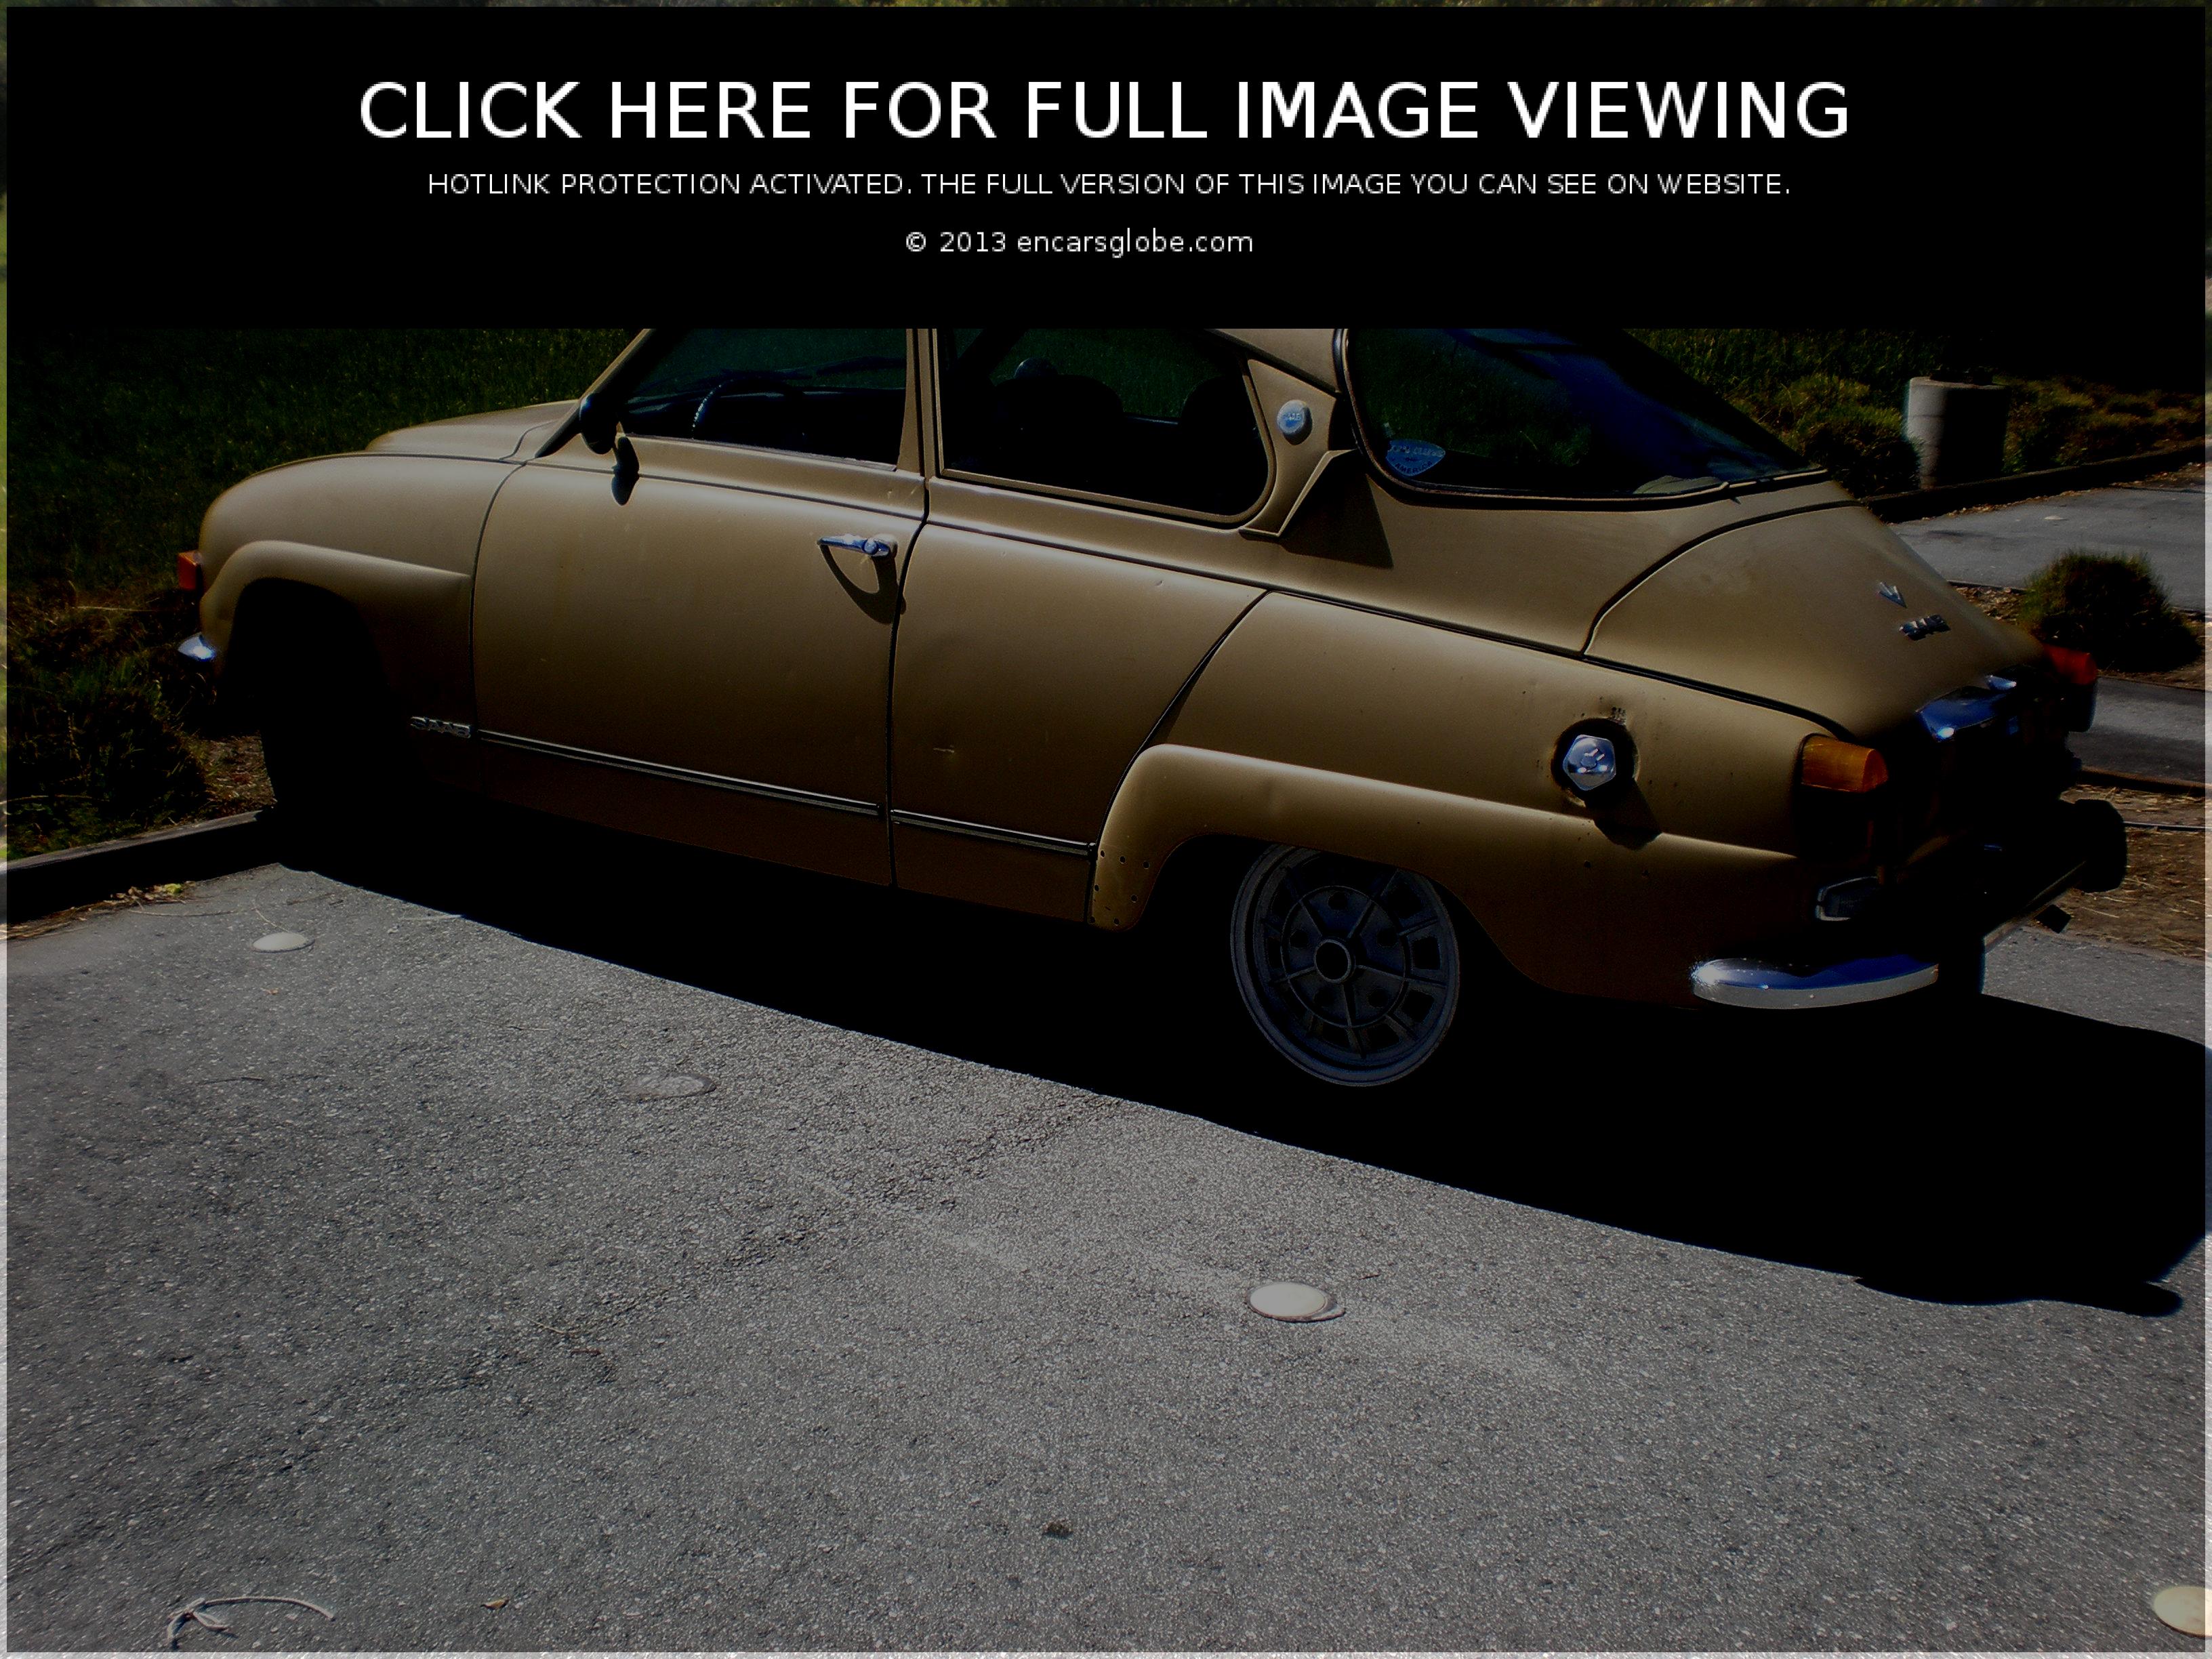 Saab 96: Description of the model, photo gallery, modifications ...